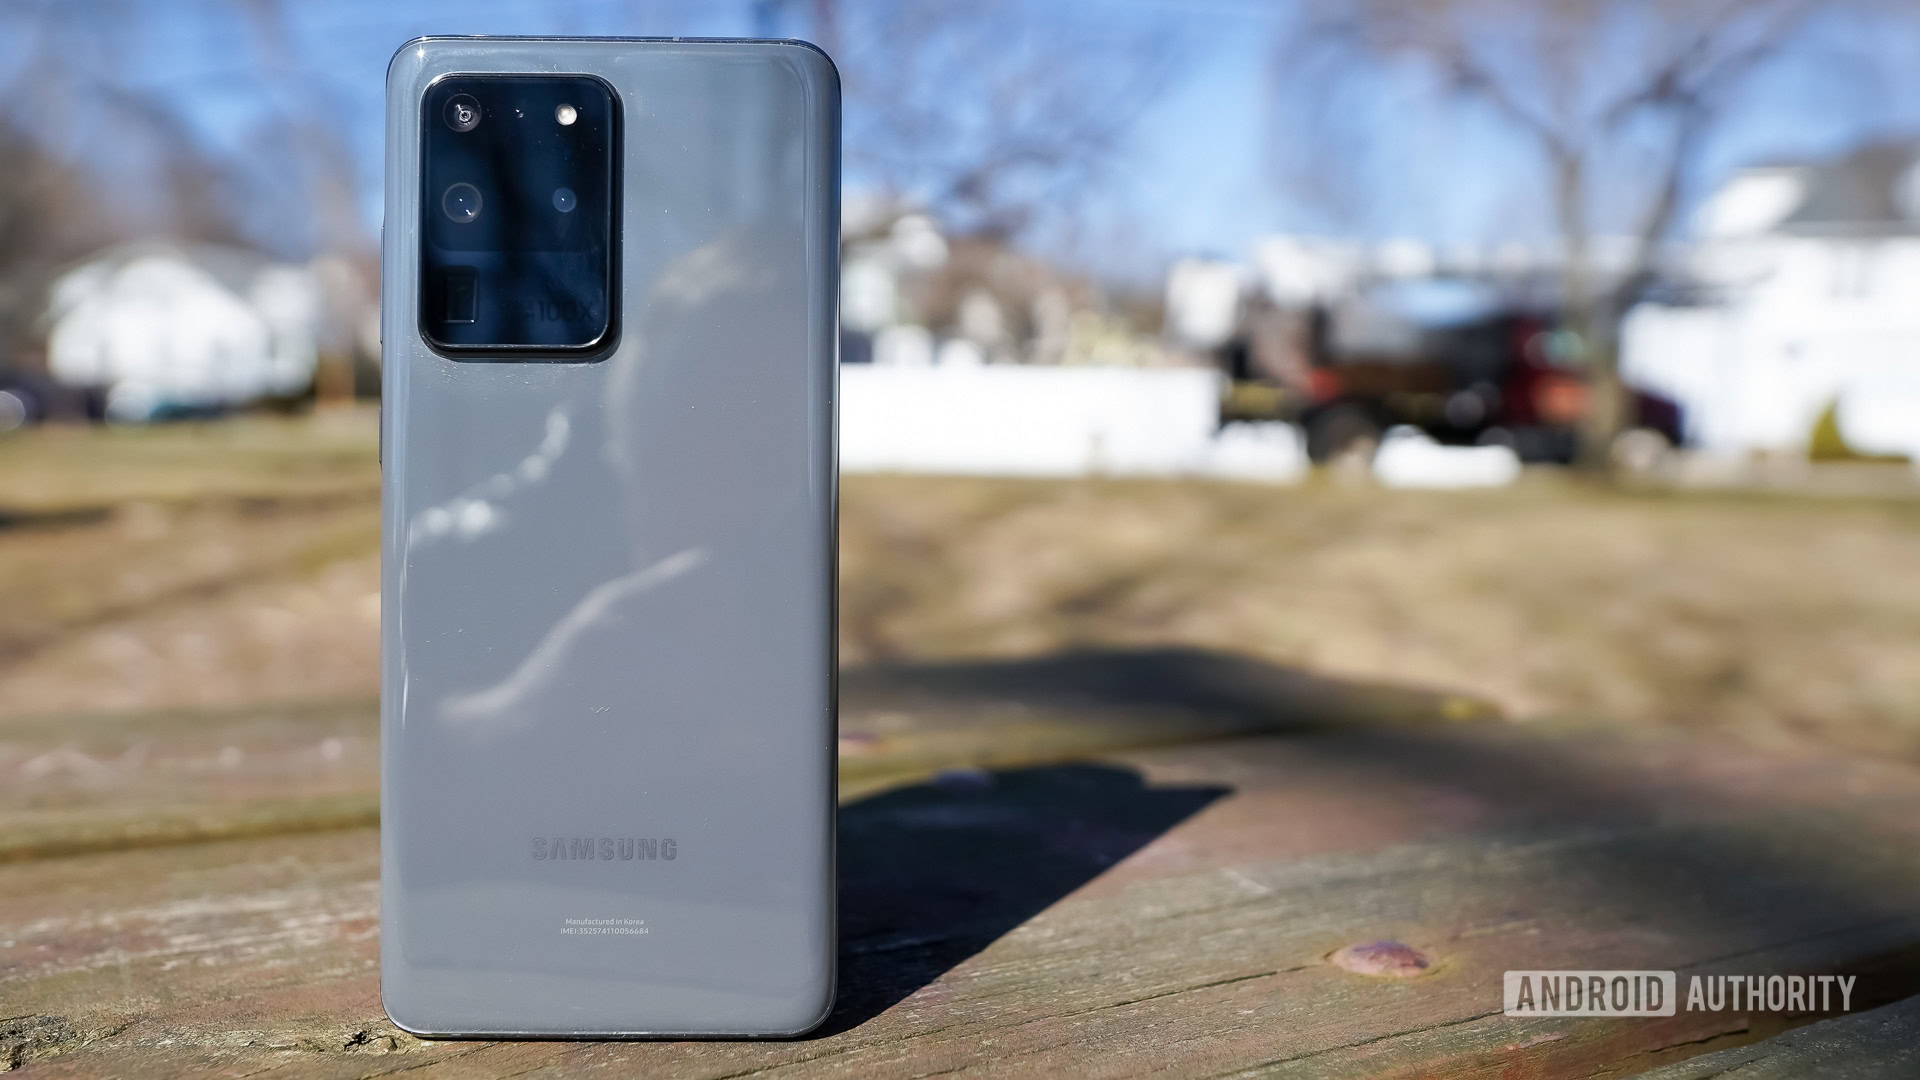 Samsung Galaxy S20 Ultra review: Too much of a good thing